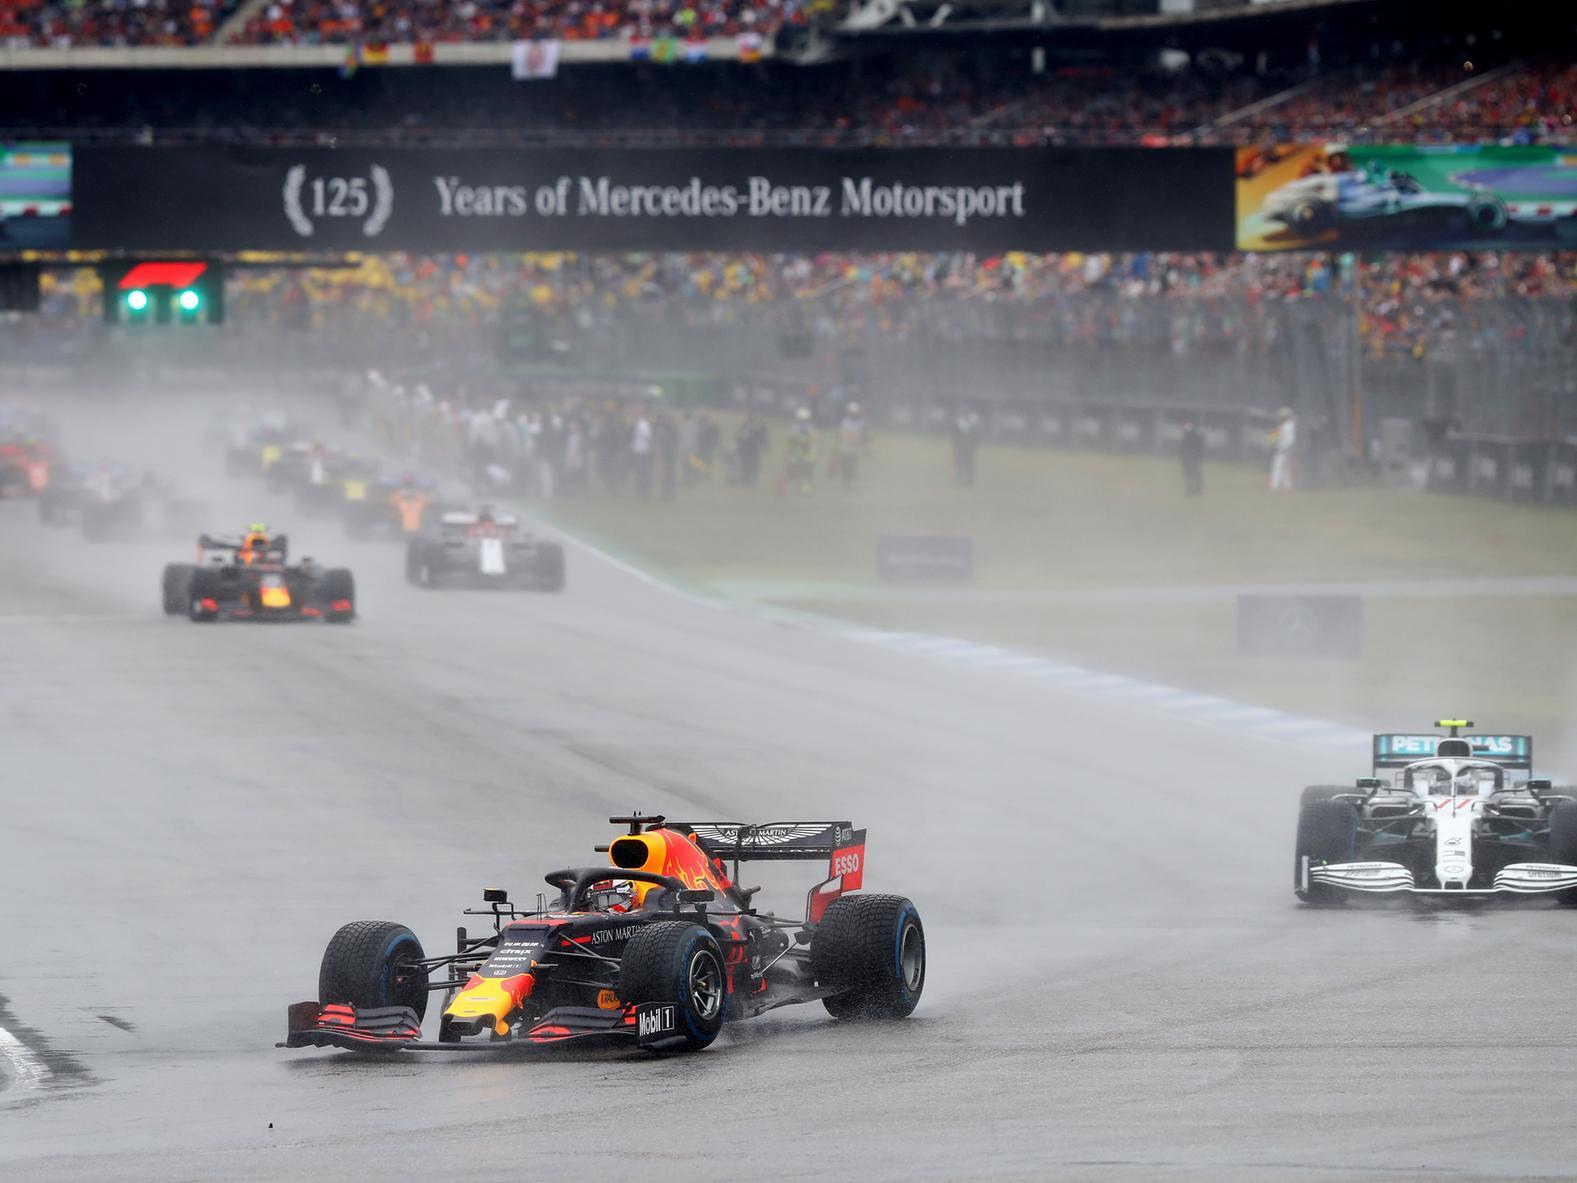 Another terrific drive in the rain not only saw him claim victory in Germany, but also spelt the end of road for team-mate Pierre Gasly at Red Bull, who simply could not handle the pace.